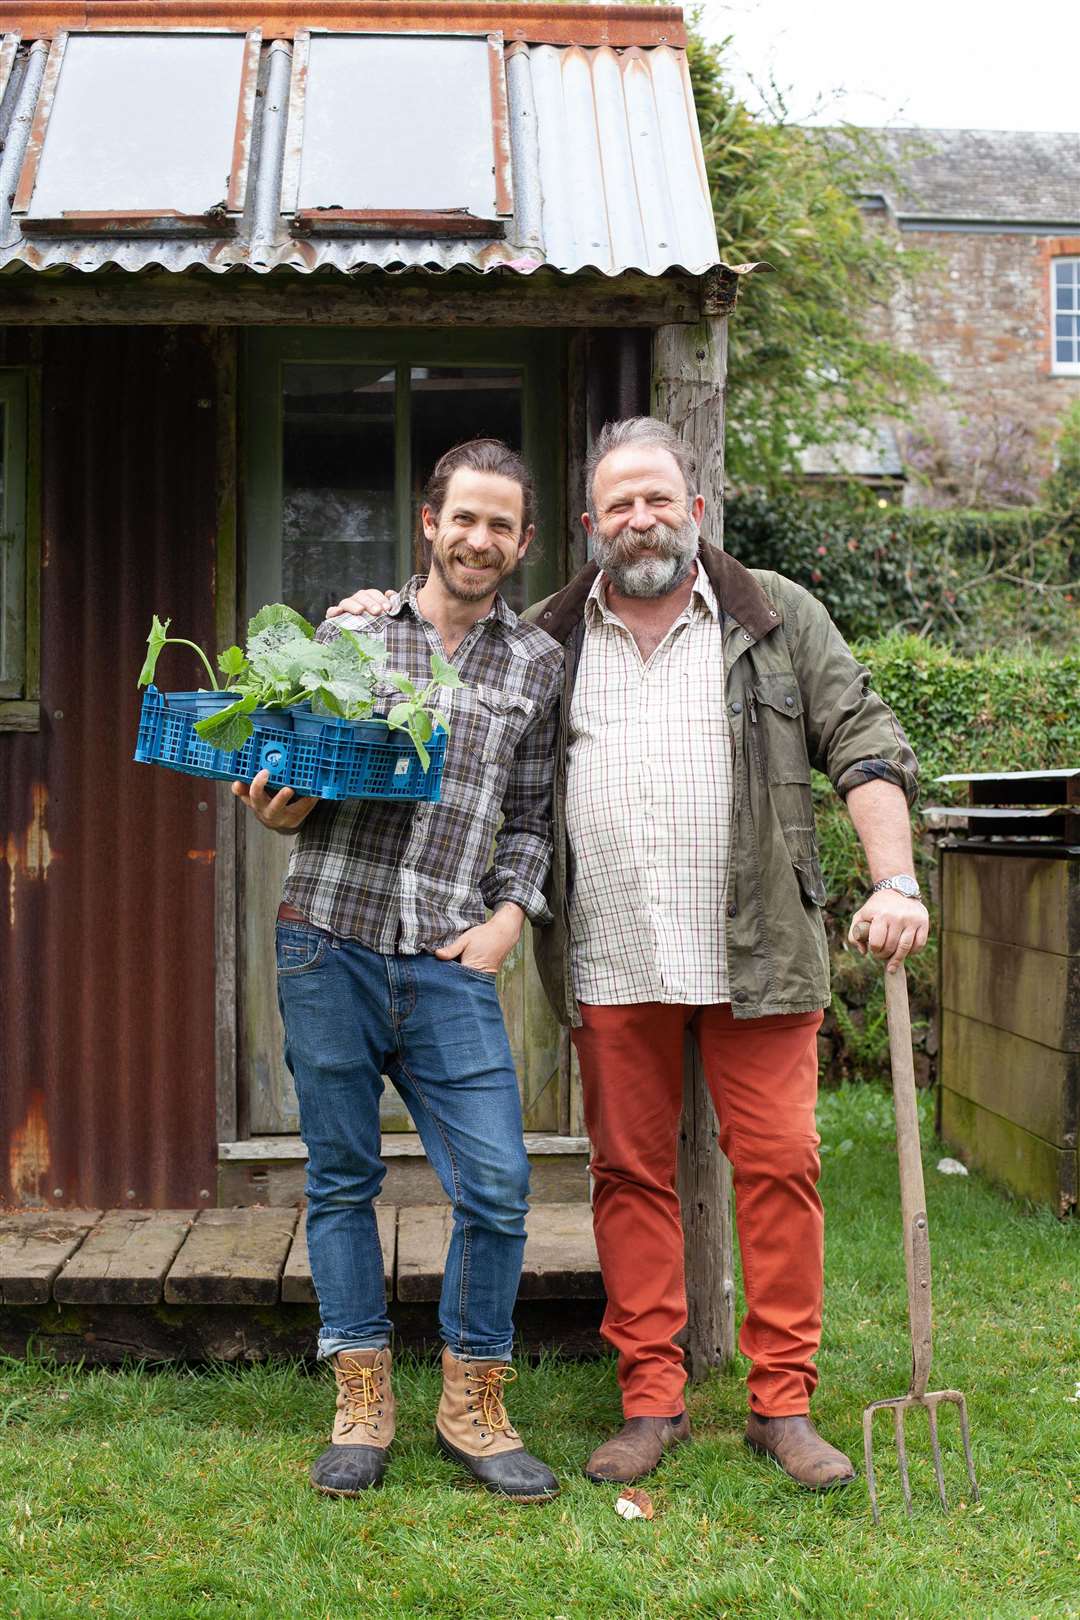 James and Dick Strawbridge. Picture: DK Images/PA